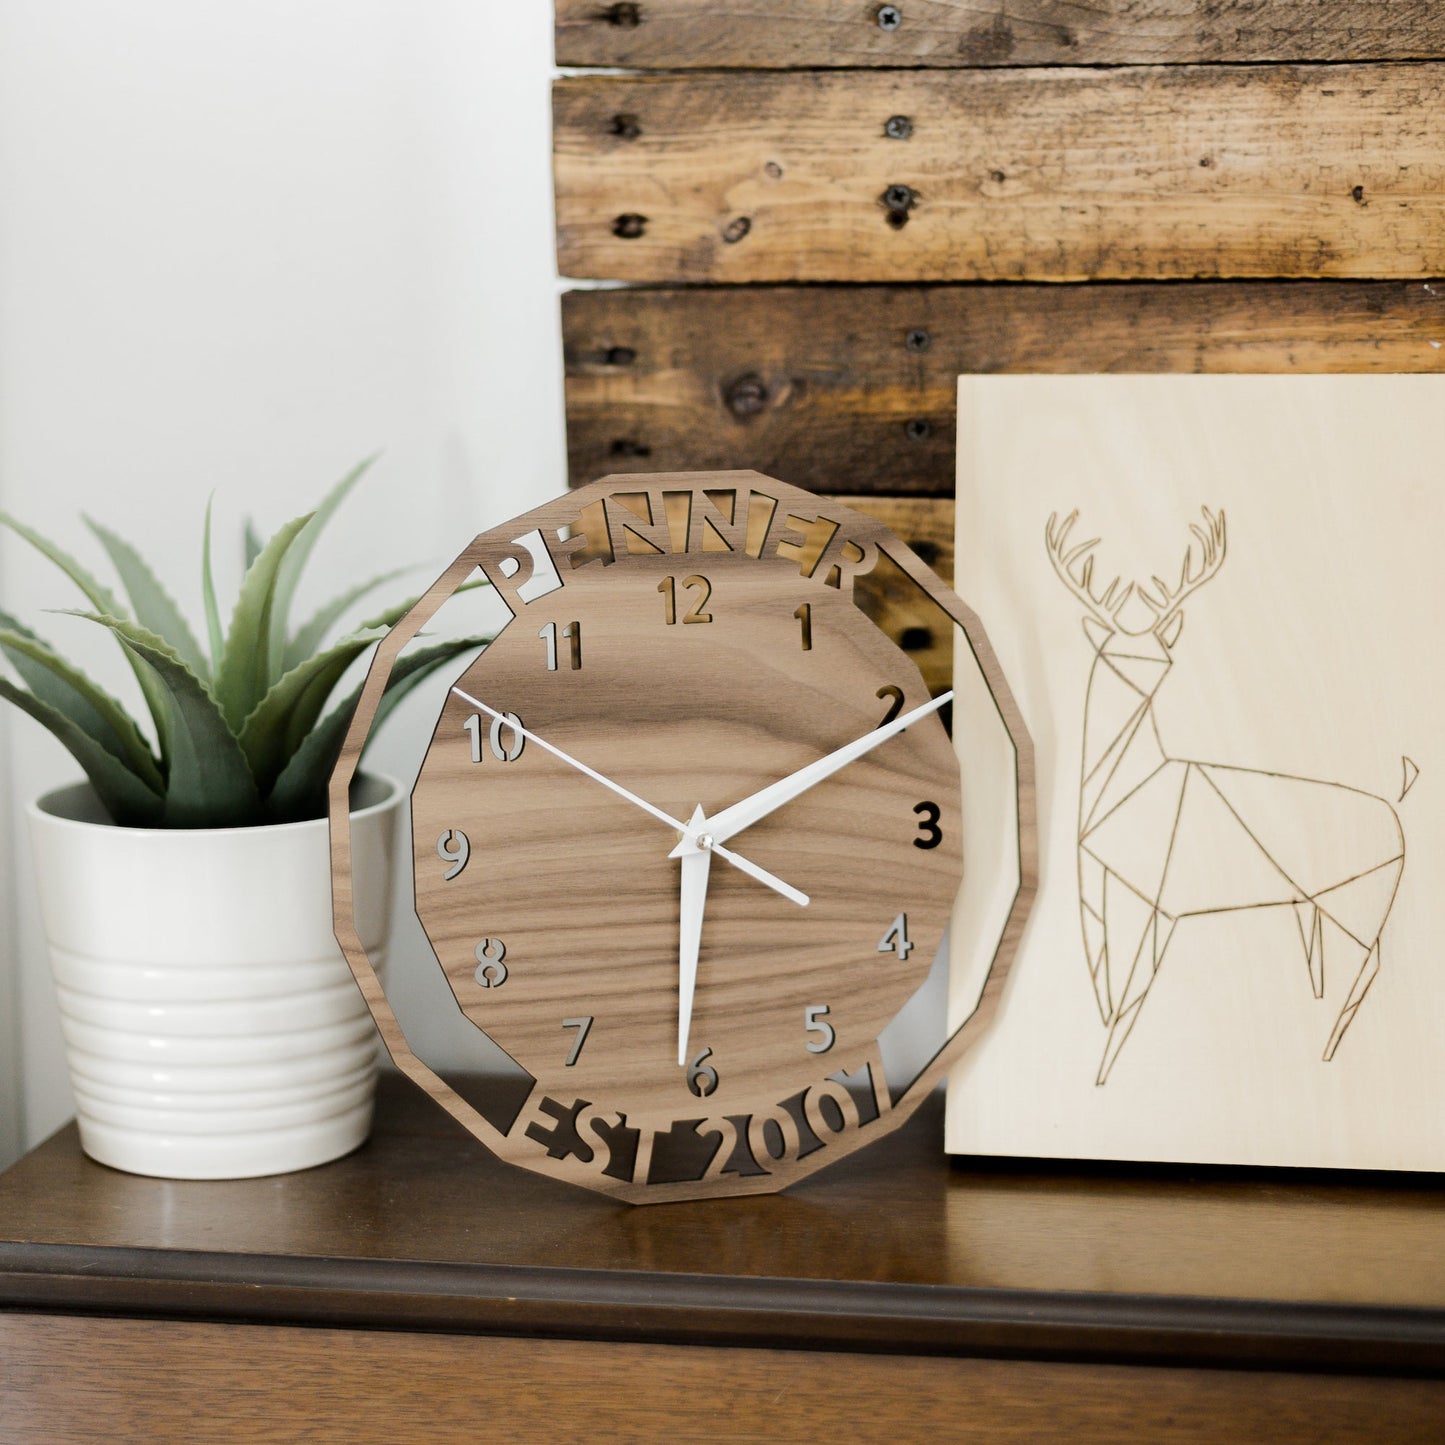 Personalized Wood Wall Clock - personalized clock for anniversary in walnut wood - by LeeMo Designs in Bend, Oregon